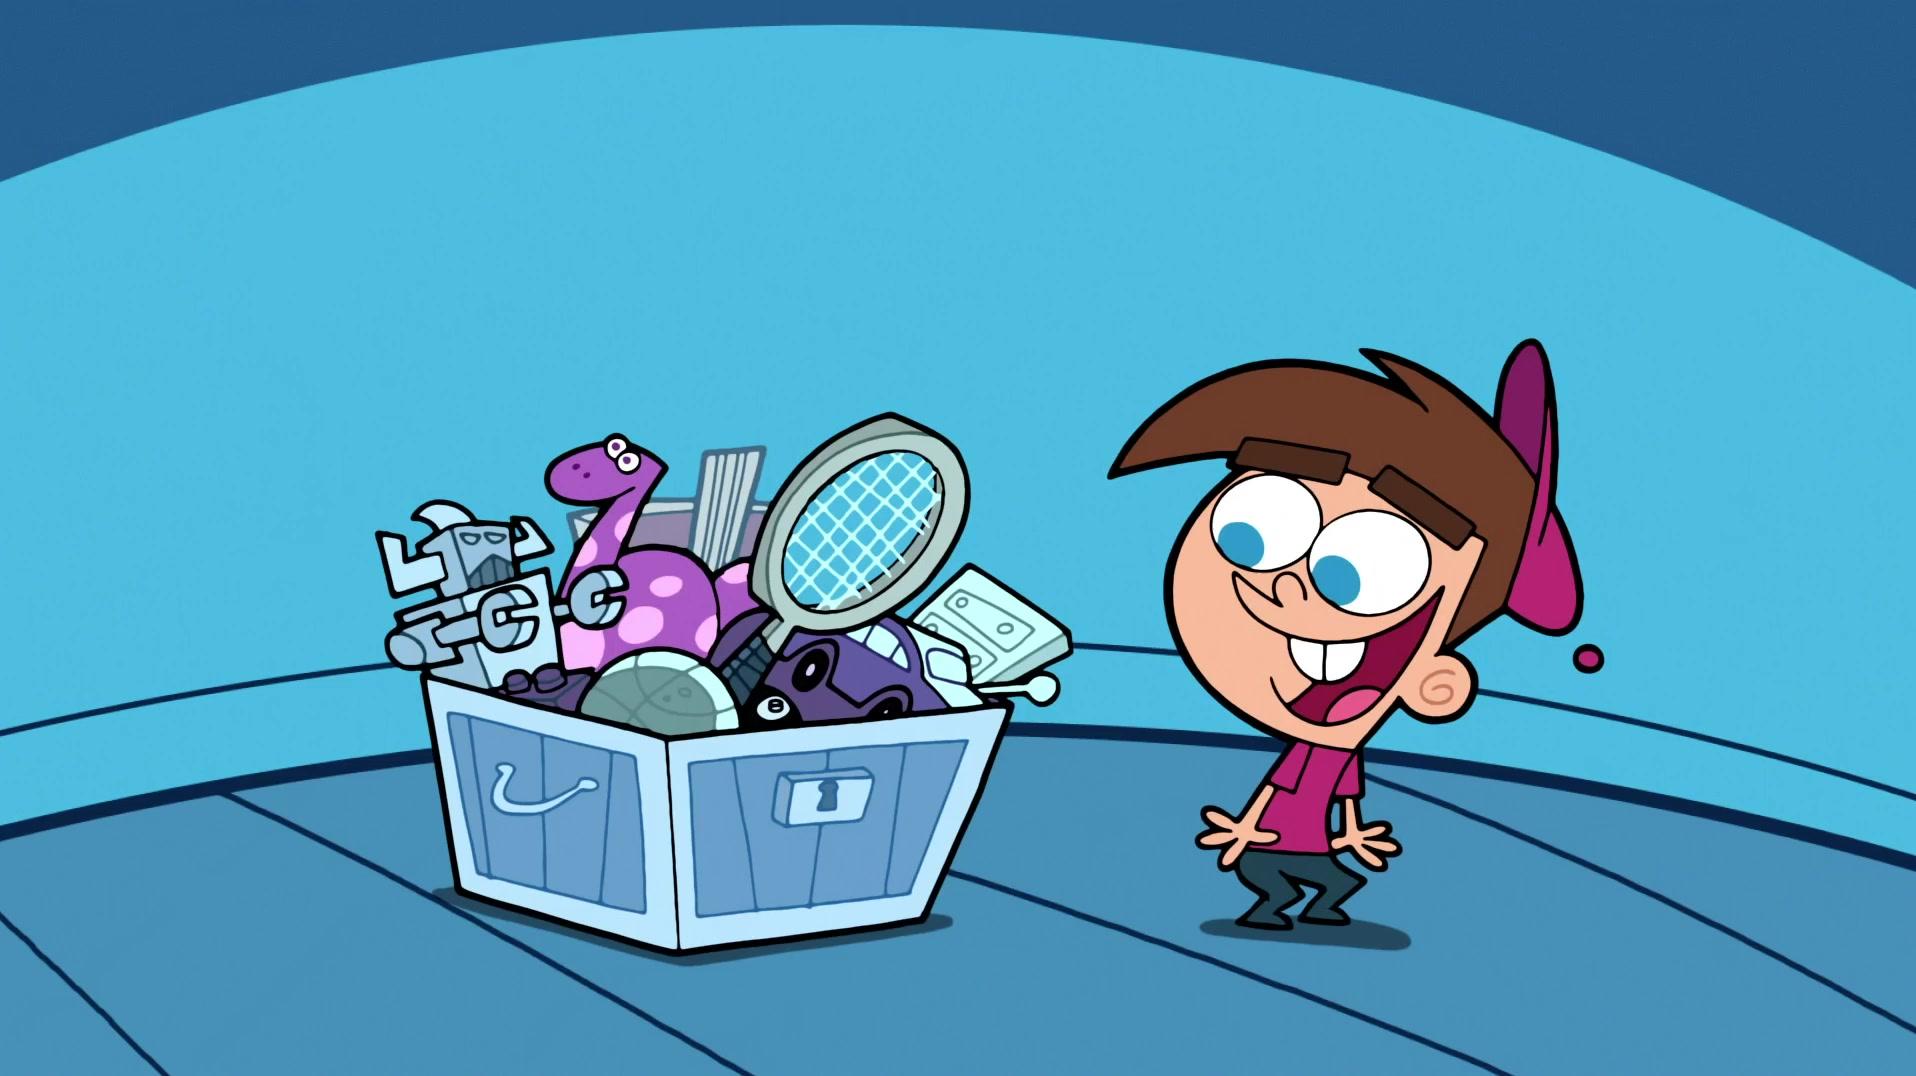 The Fairly OddParents Wallpaper. Fairly